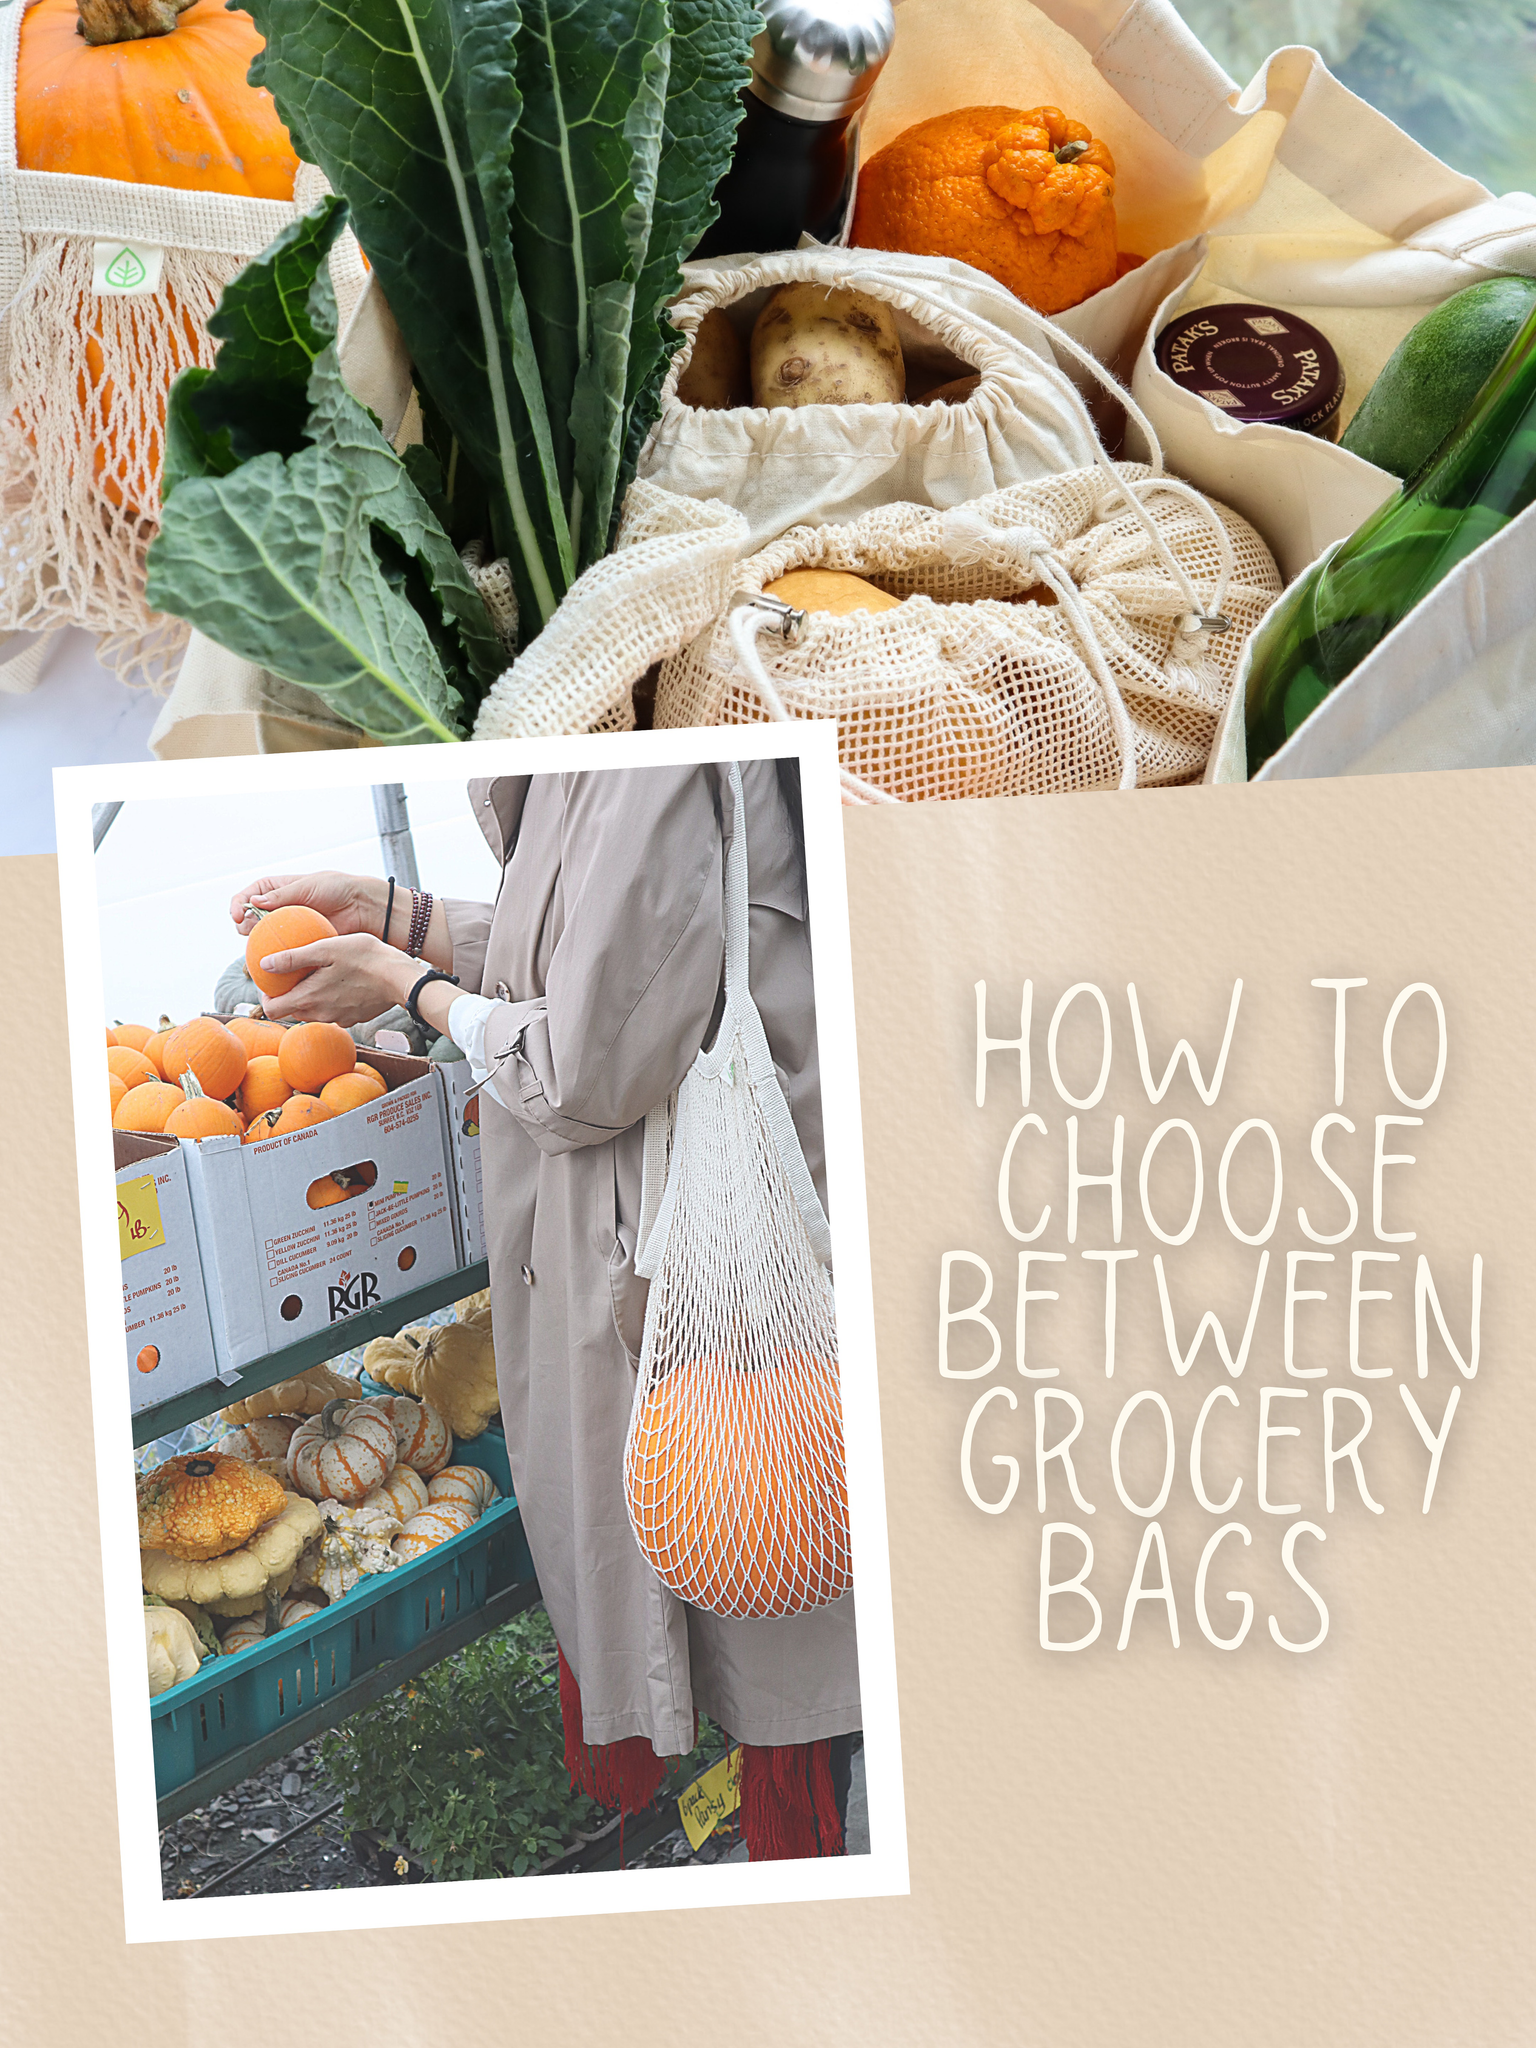 How to Choose Between Grocery Bags